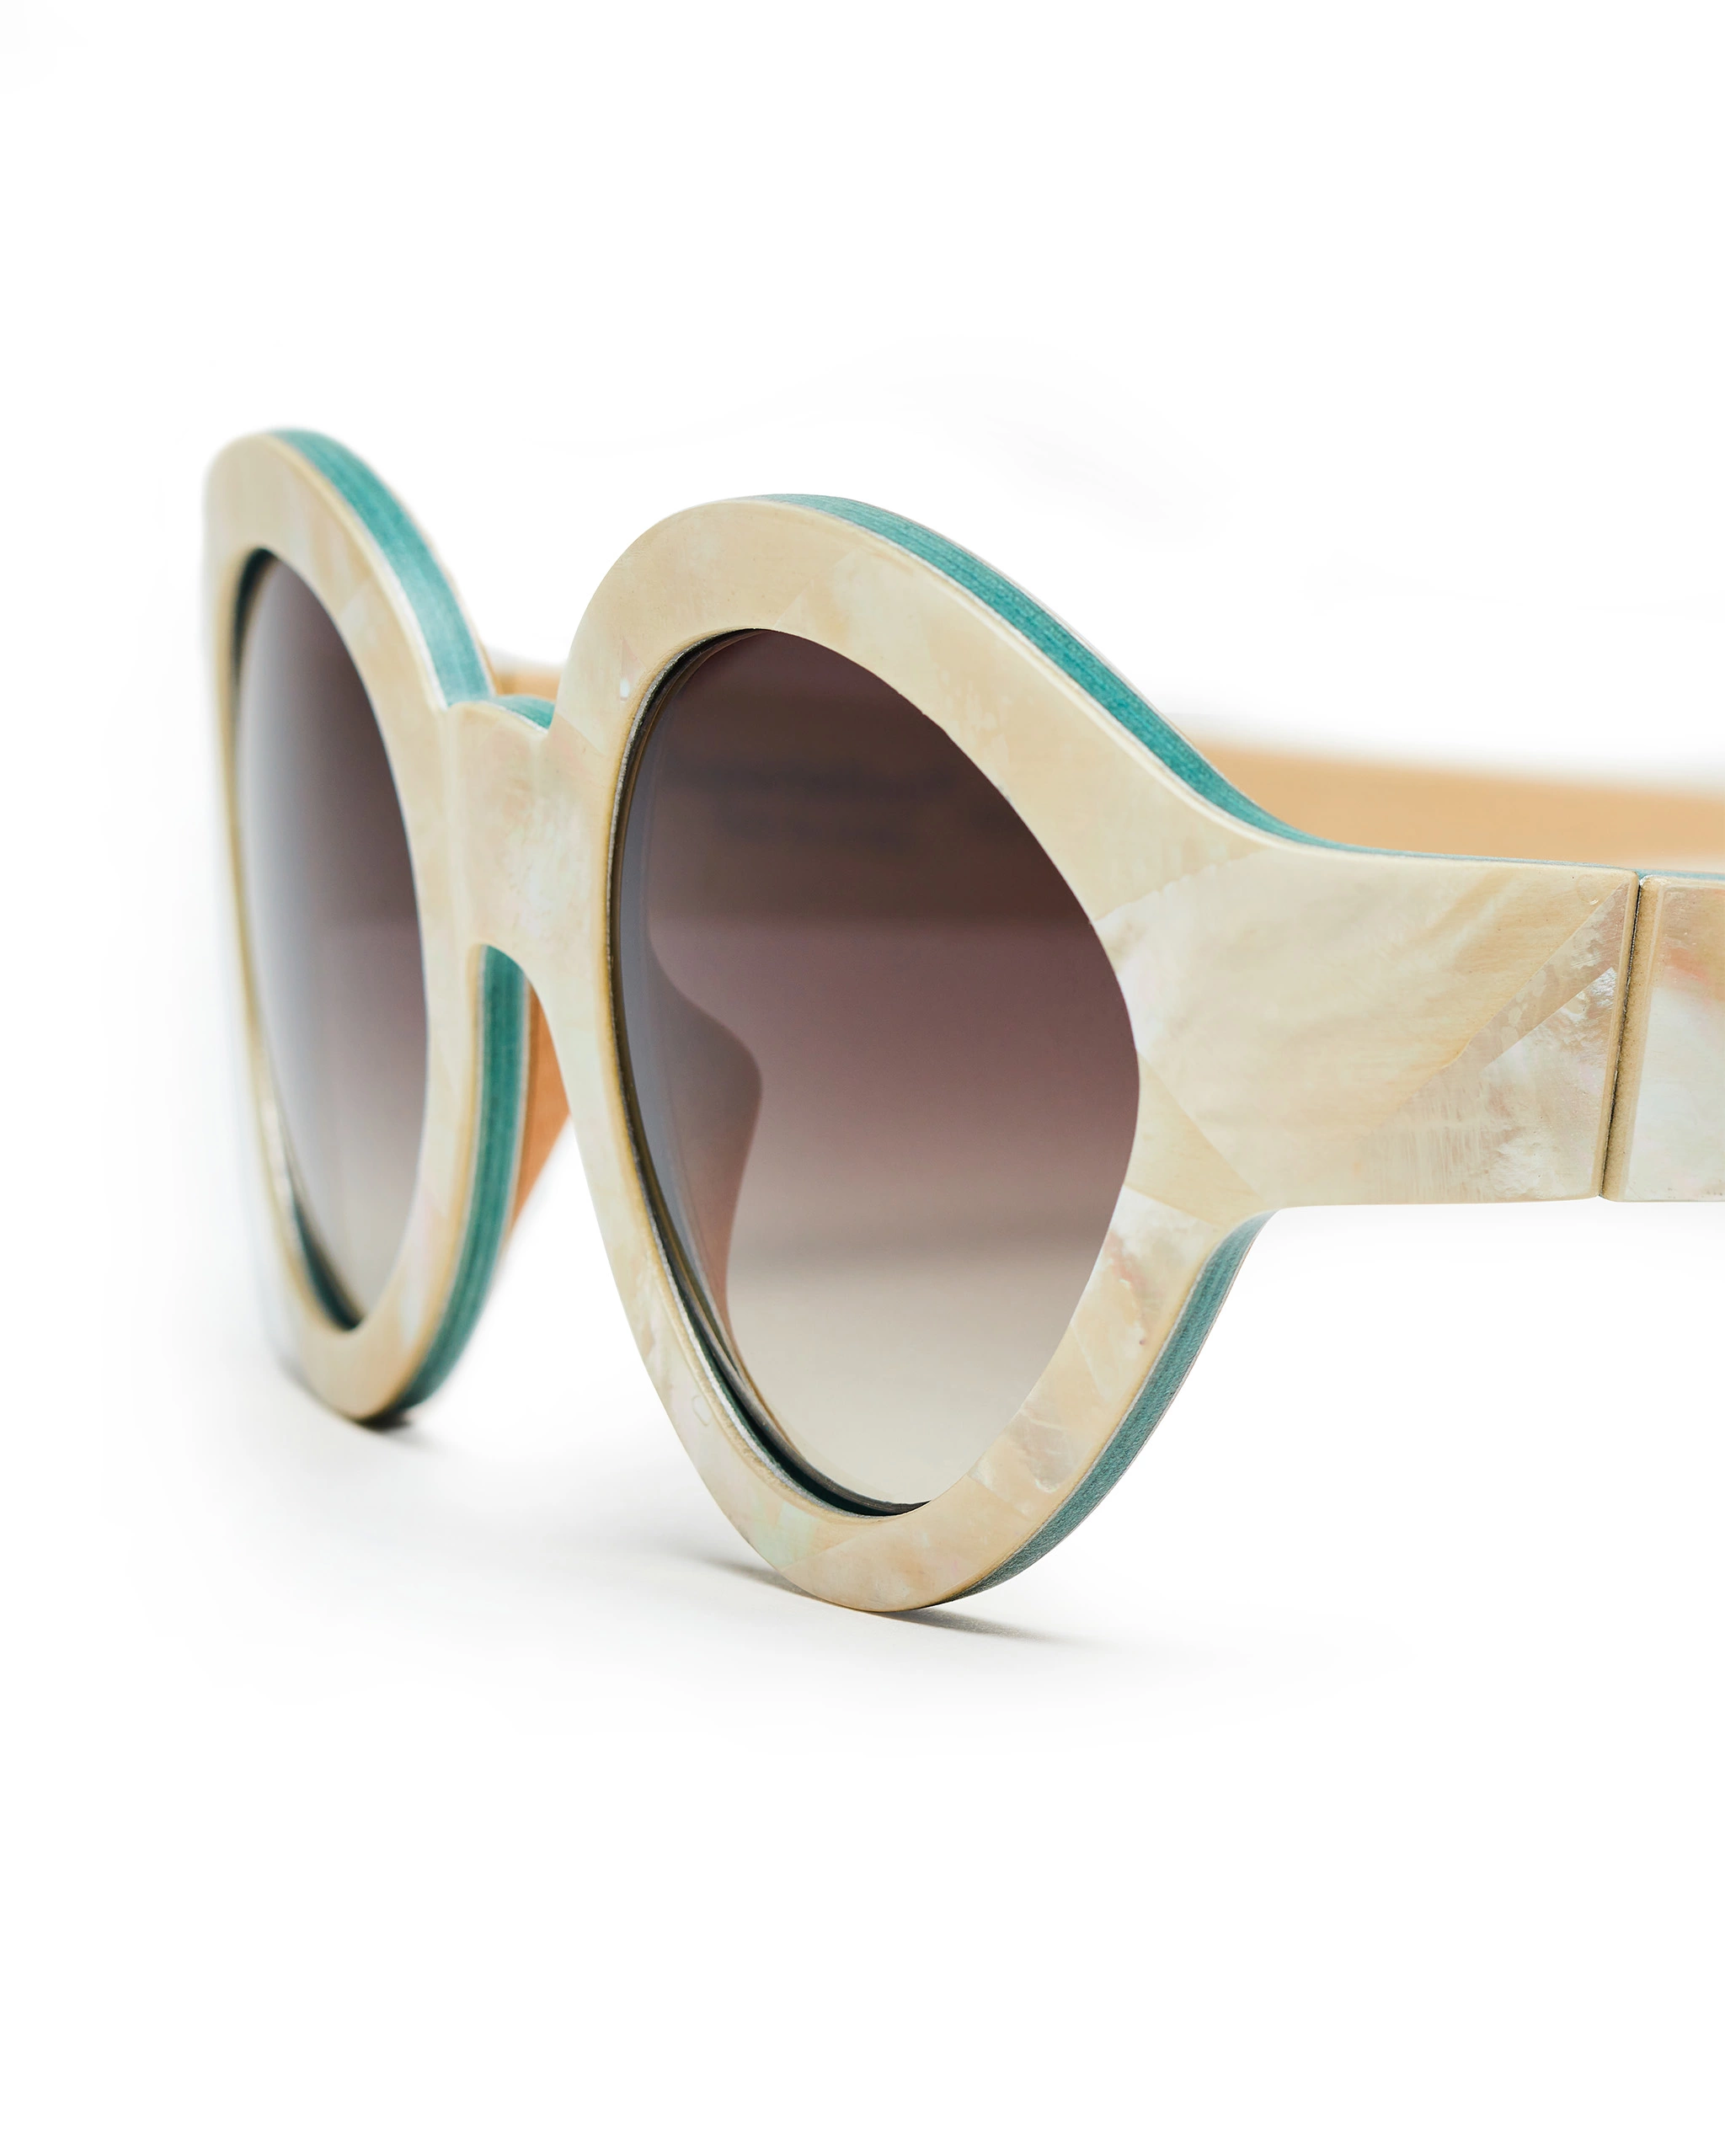 a close up of mother of pearl sunglasses